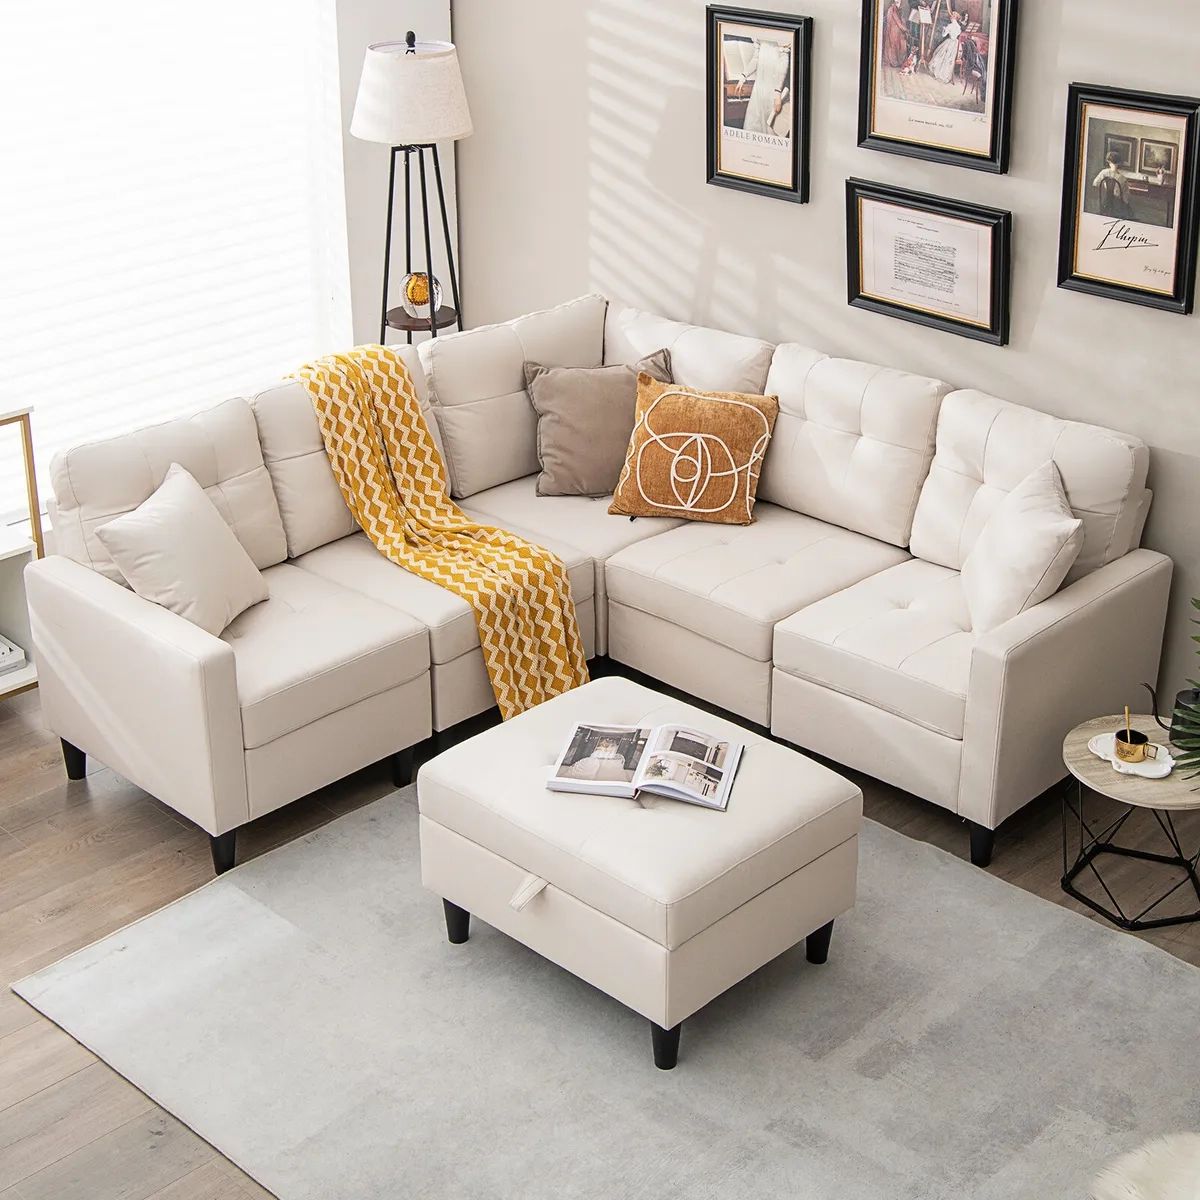 L Shaped Sectional Corner Sofa Set W/ Removable Ottoman & Seat Cushions  Beige | Ebay Pertaining To Beige L Shaped Sectional Sofas (View 5 of 15)